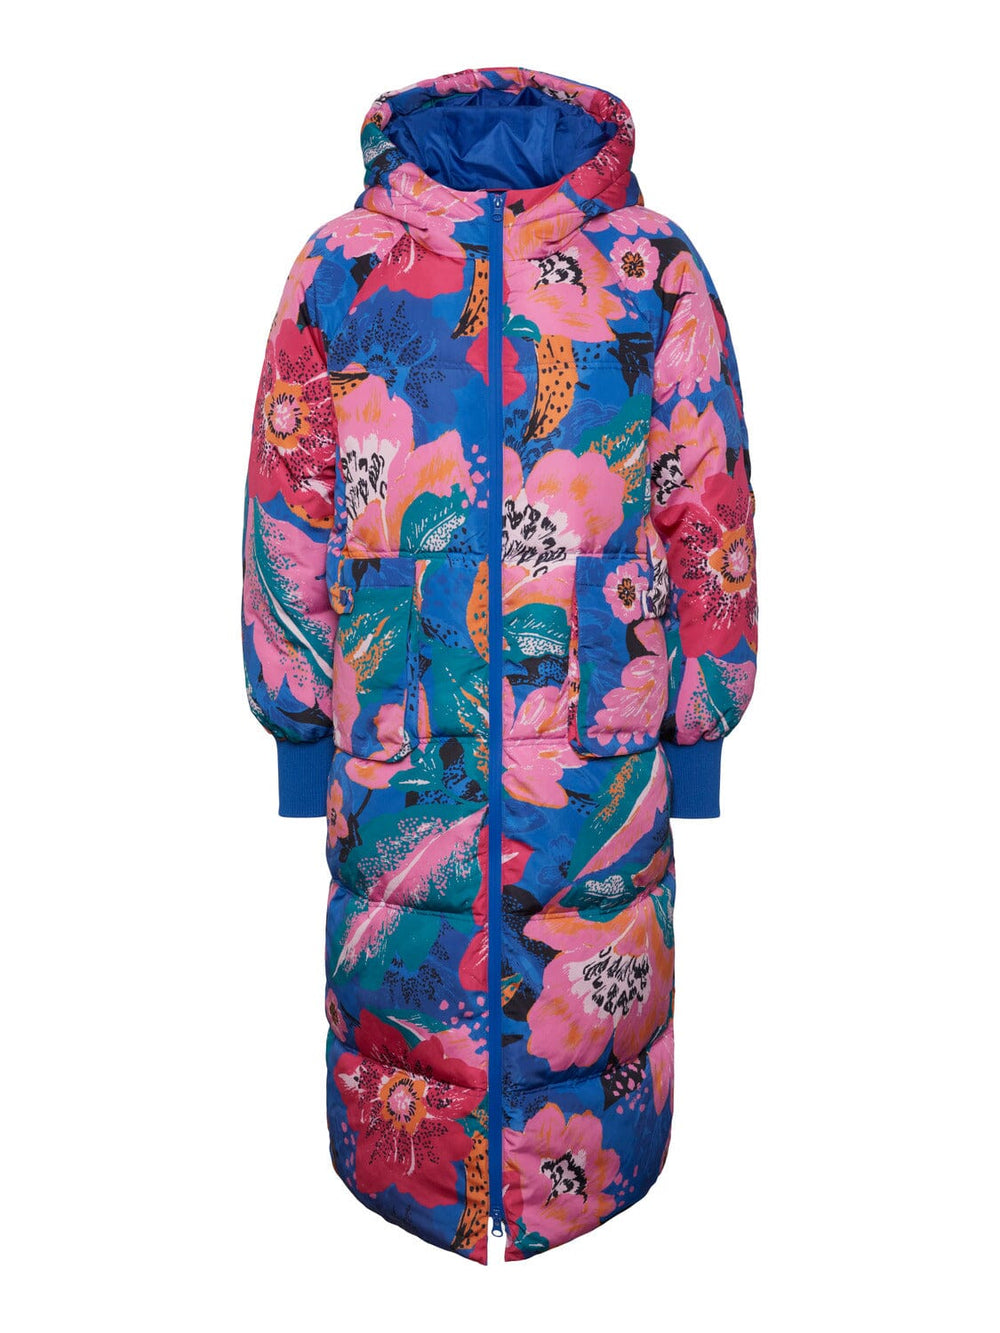 Y.A.S, Yassimilly Padded Coat S., Blue Iolite Milana print